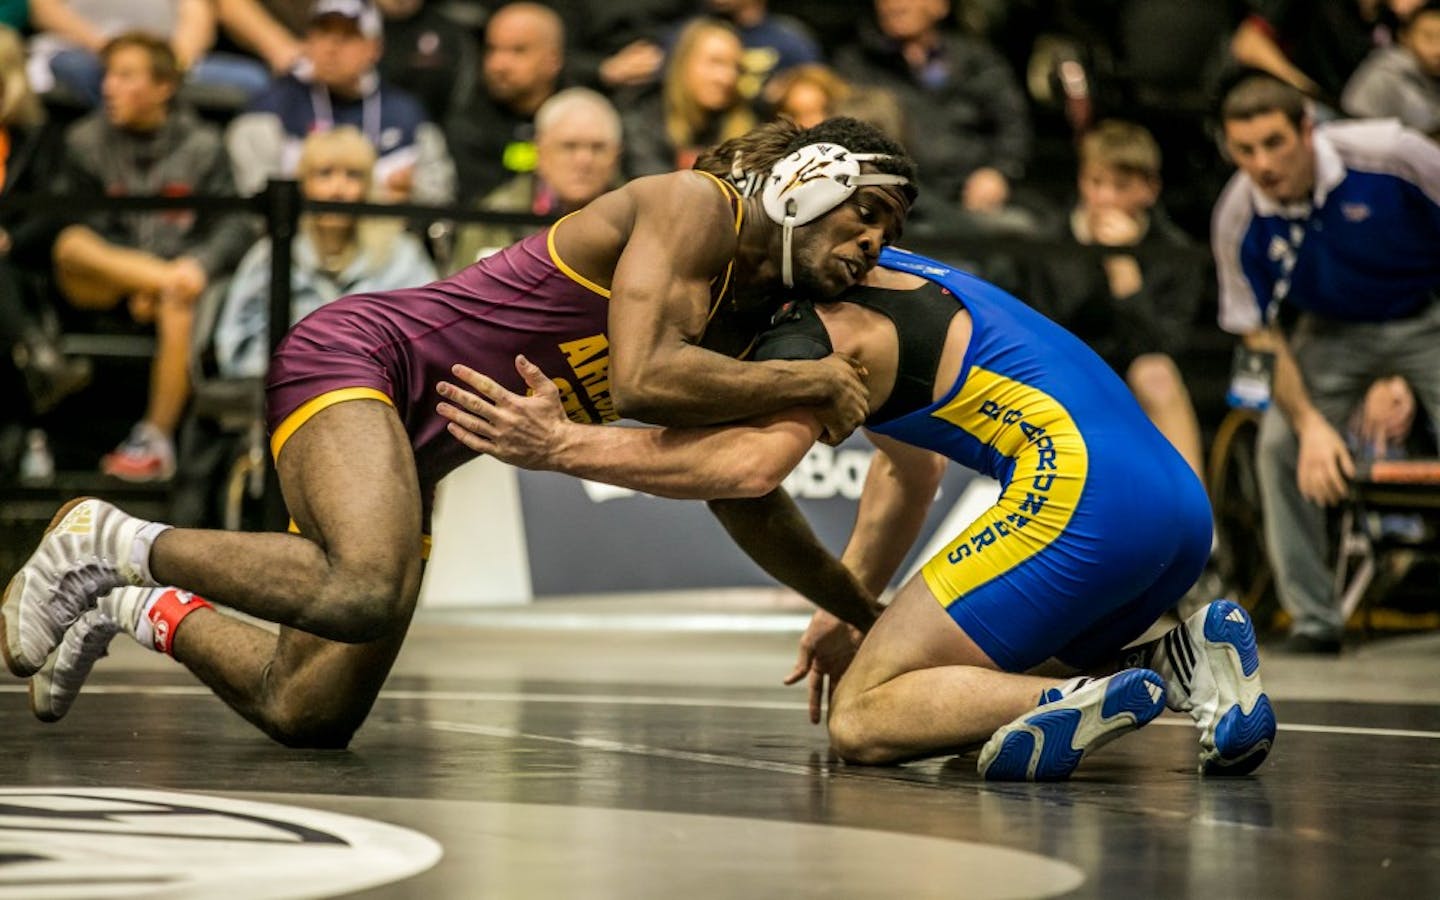 Photo Gallery of the PAC12 Wrestling Championship in Corvallis Oregon